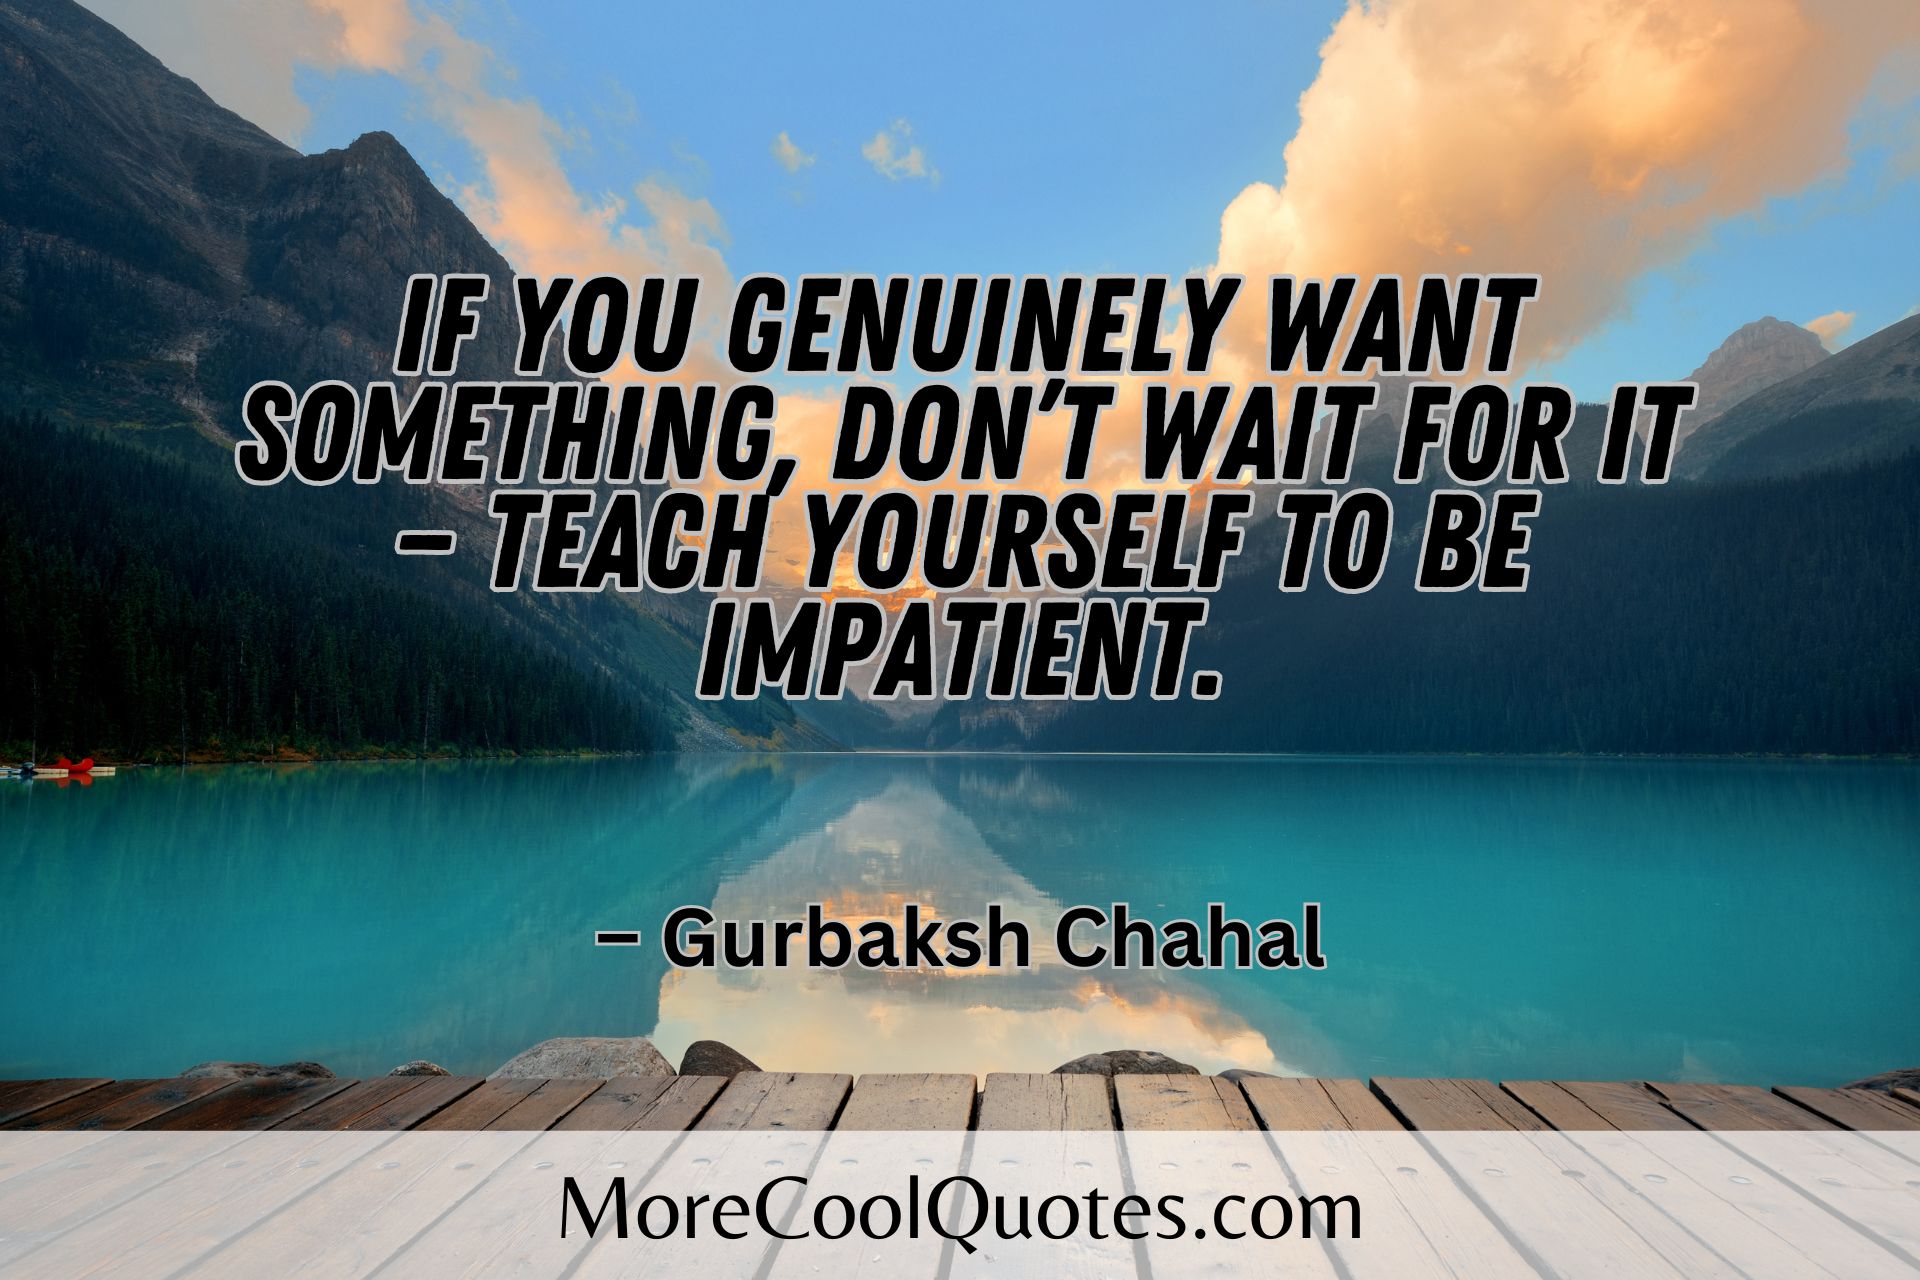 If you genuinely want something, don’t wait for it